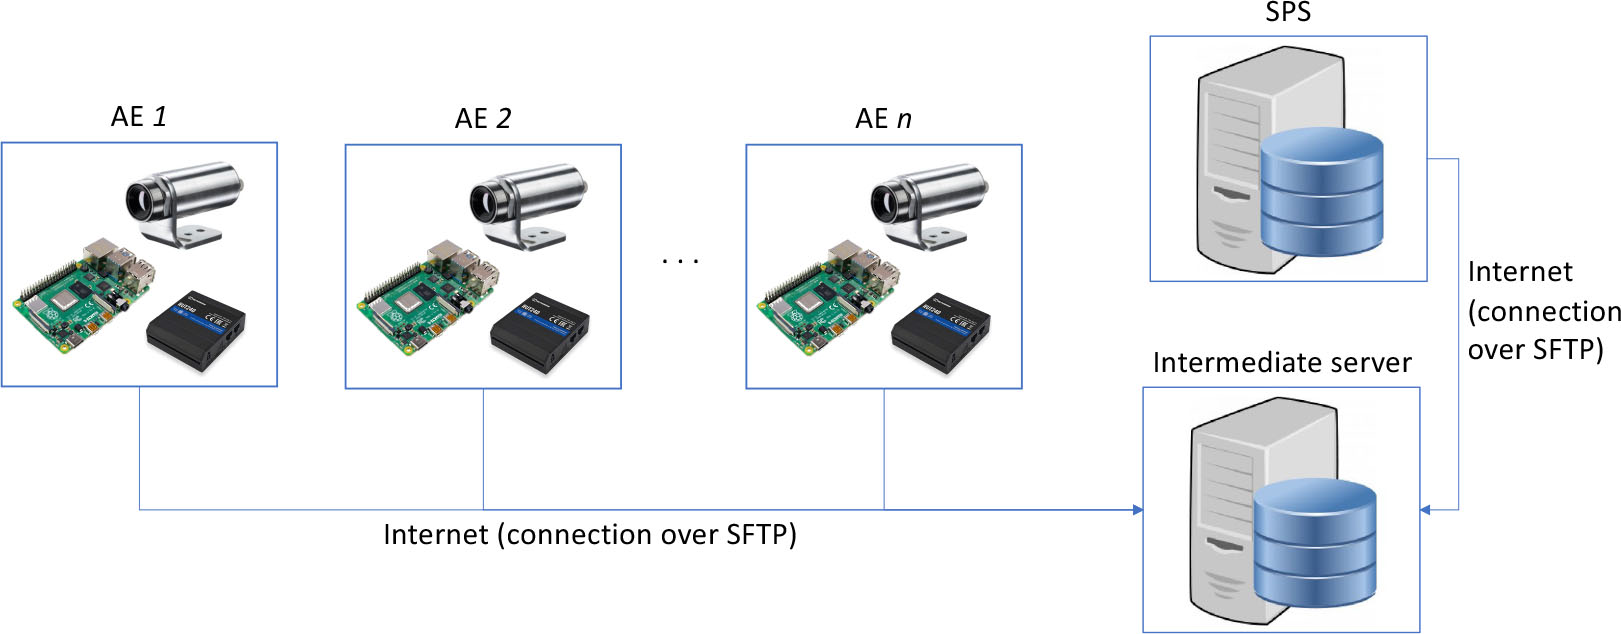 Device scheme showing the integration of several AEs and communication between AEs and SPS by means of an intermediate server.